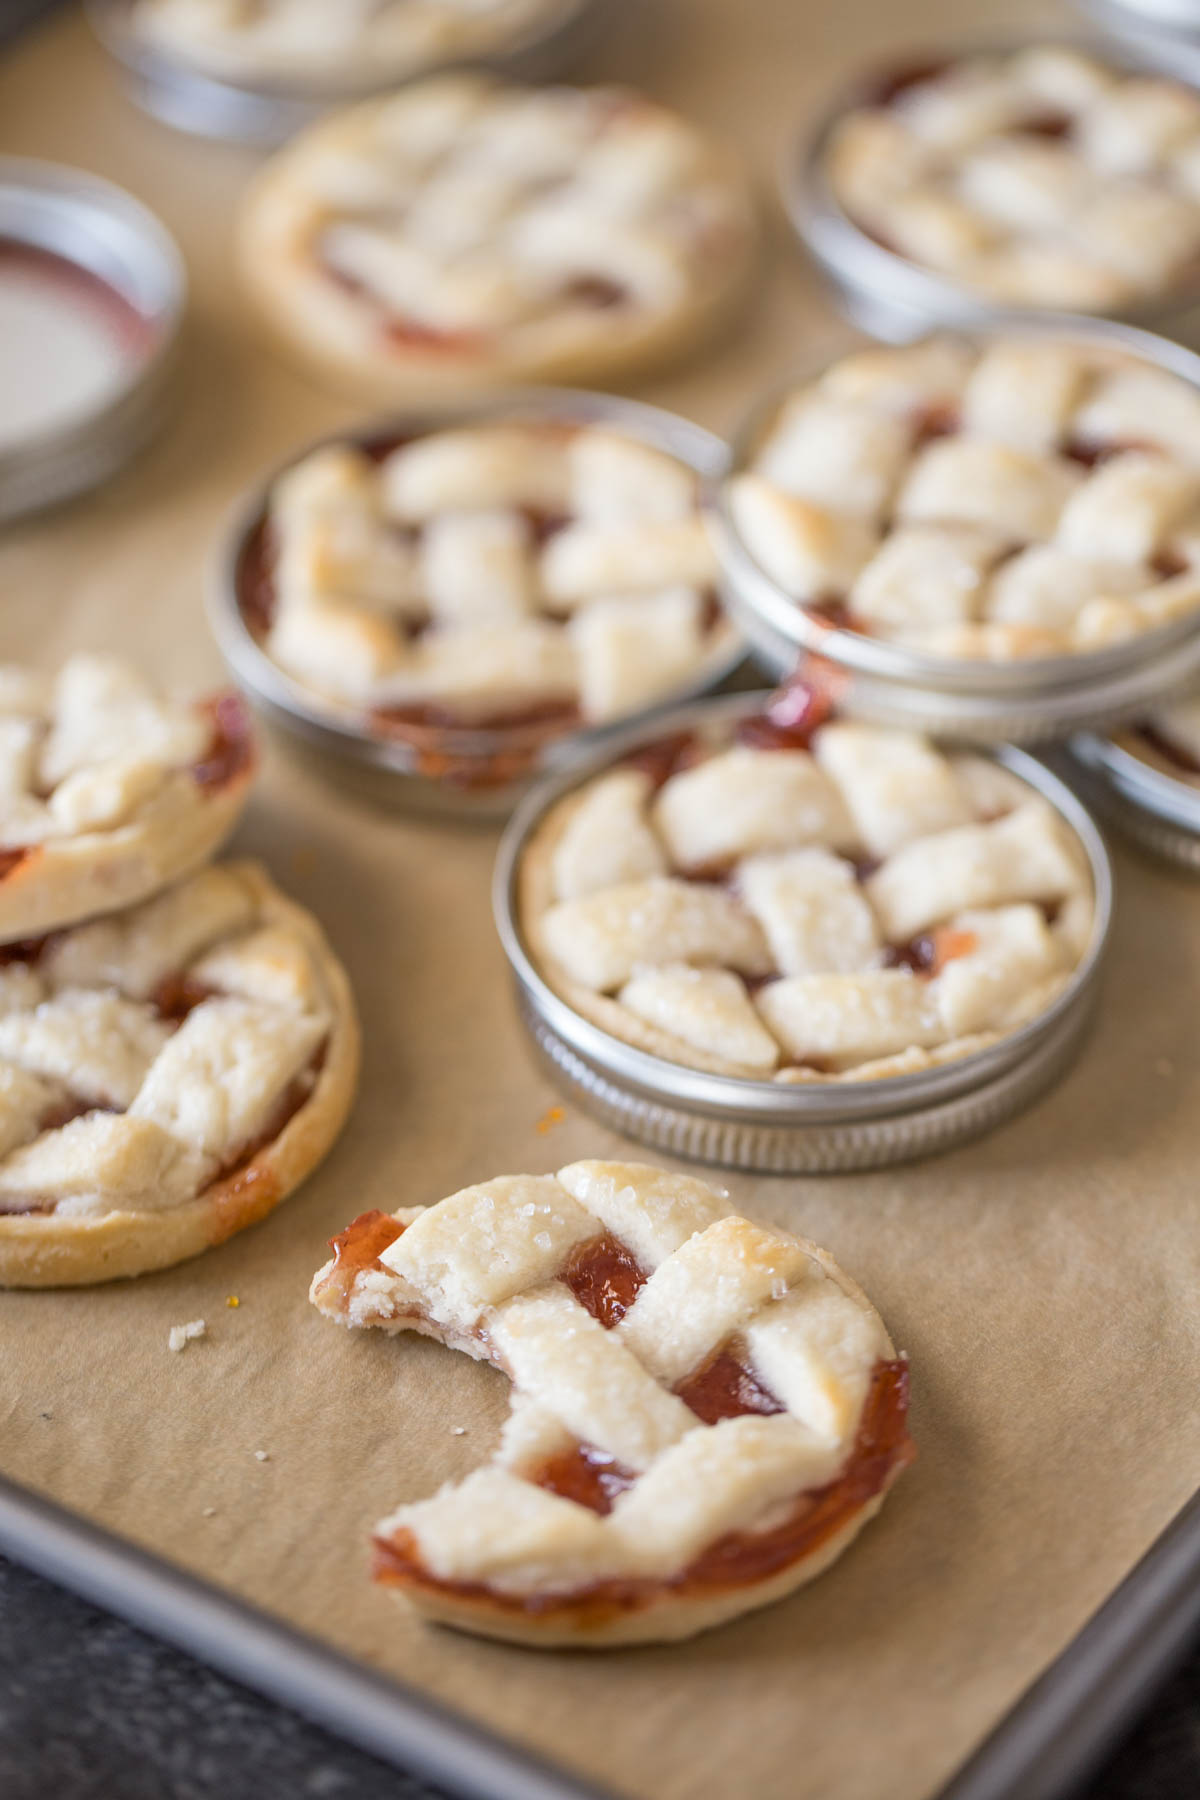 Mini Mason Jar Strawberry Pies on a parchment paper lined baking sheet after they have been baked, with some of the pies out of the lids and one pie with a bite taken out of it. 